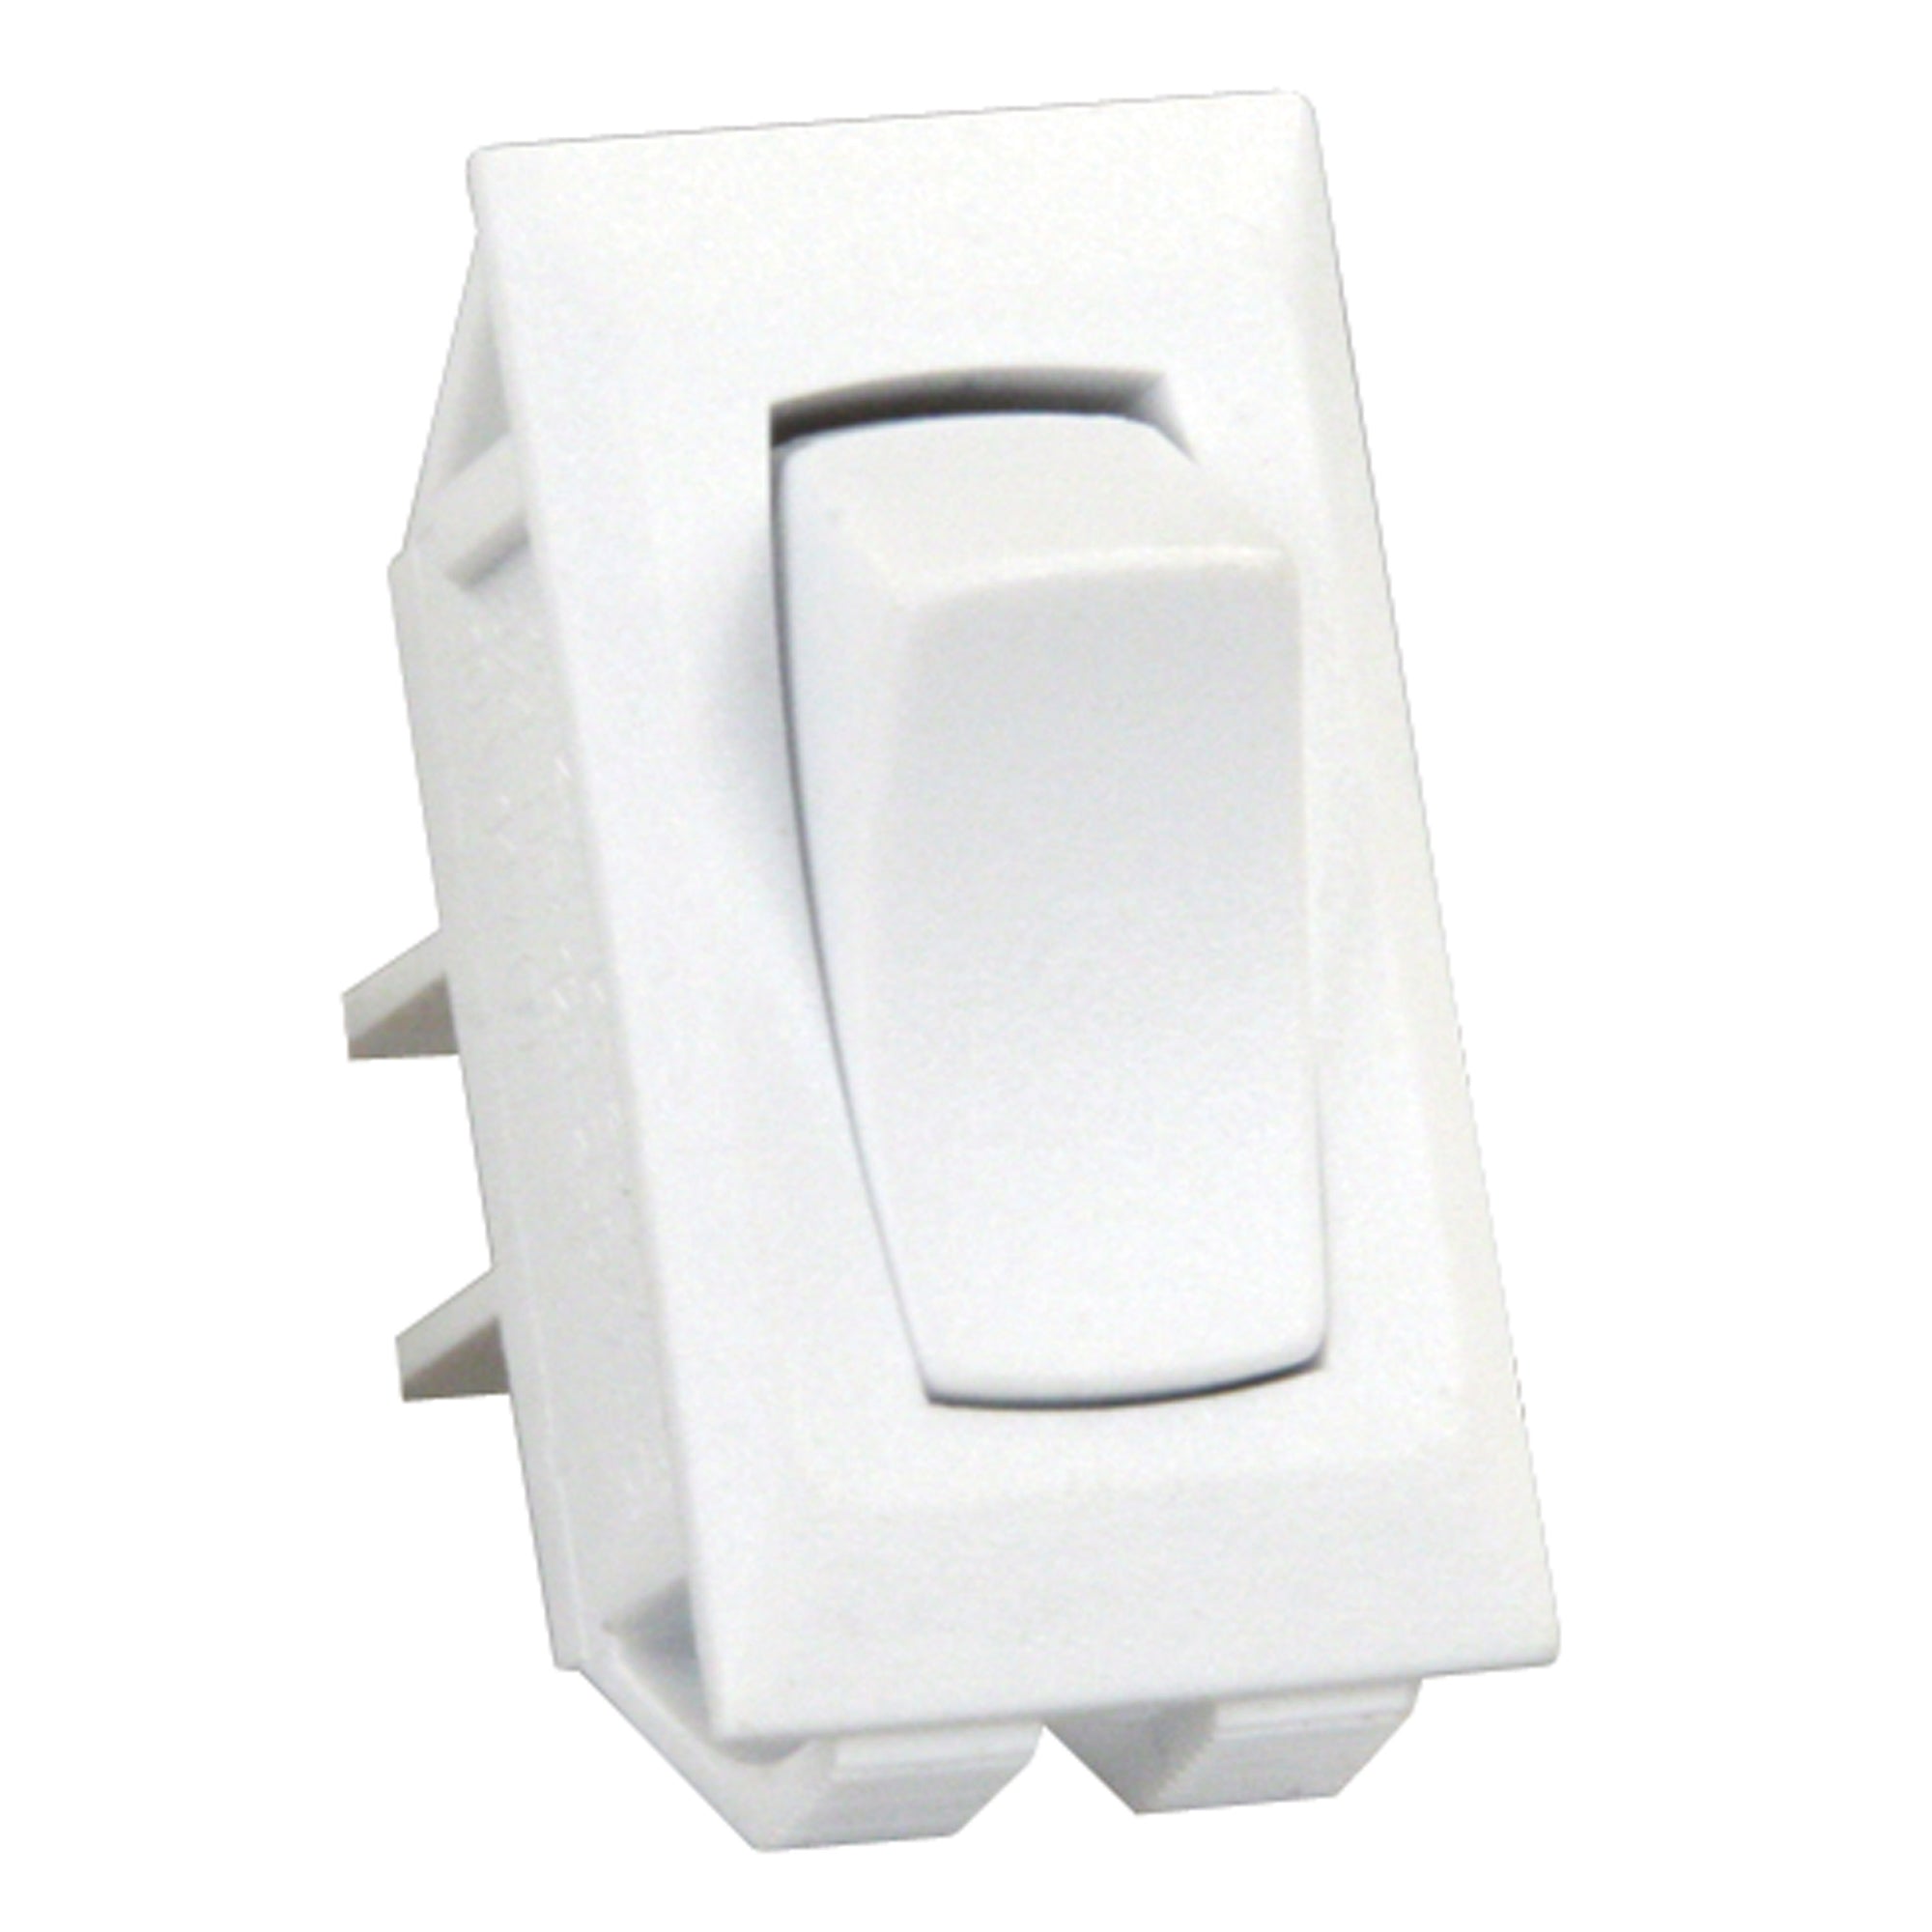 JR Products 13395 On/Off Switch - White